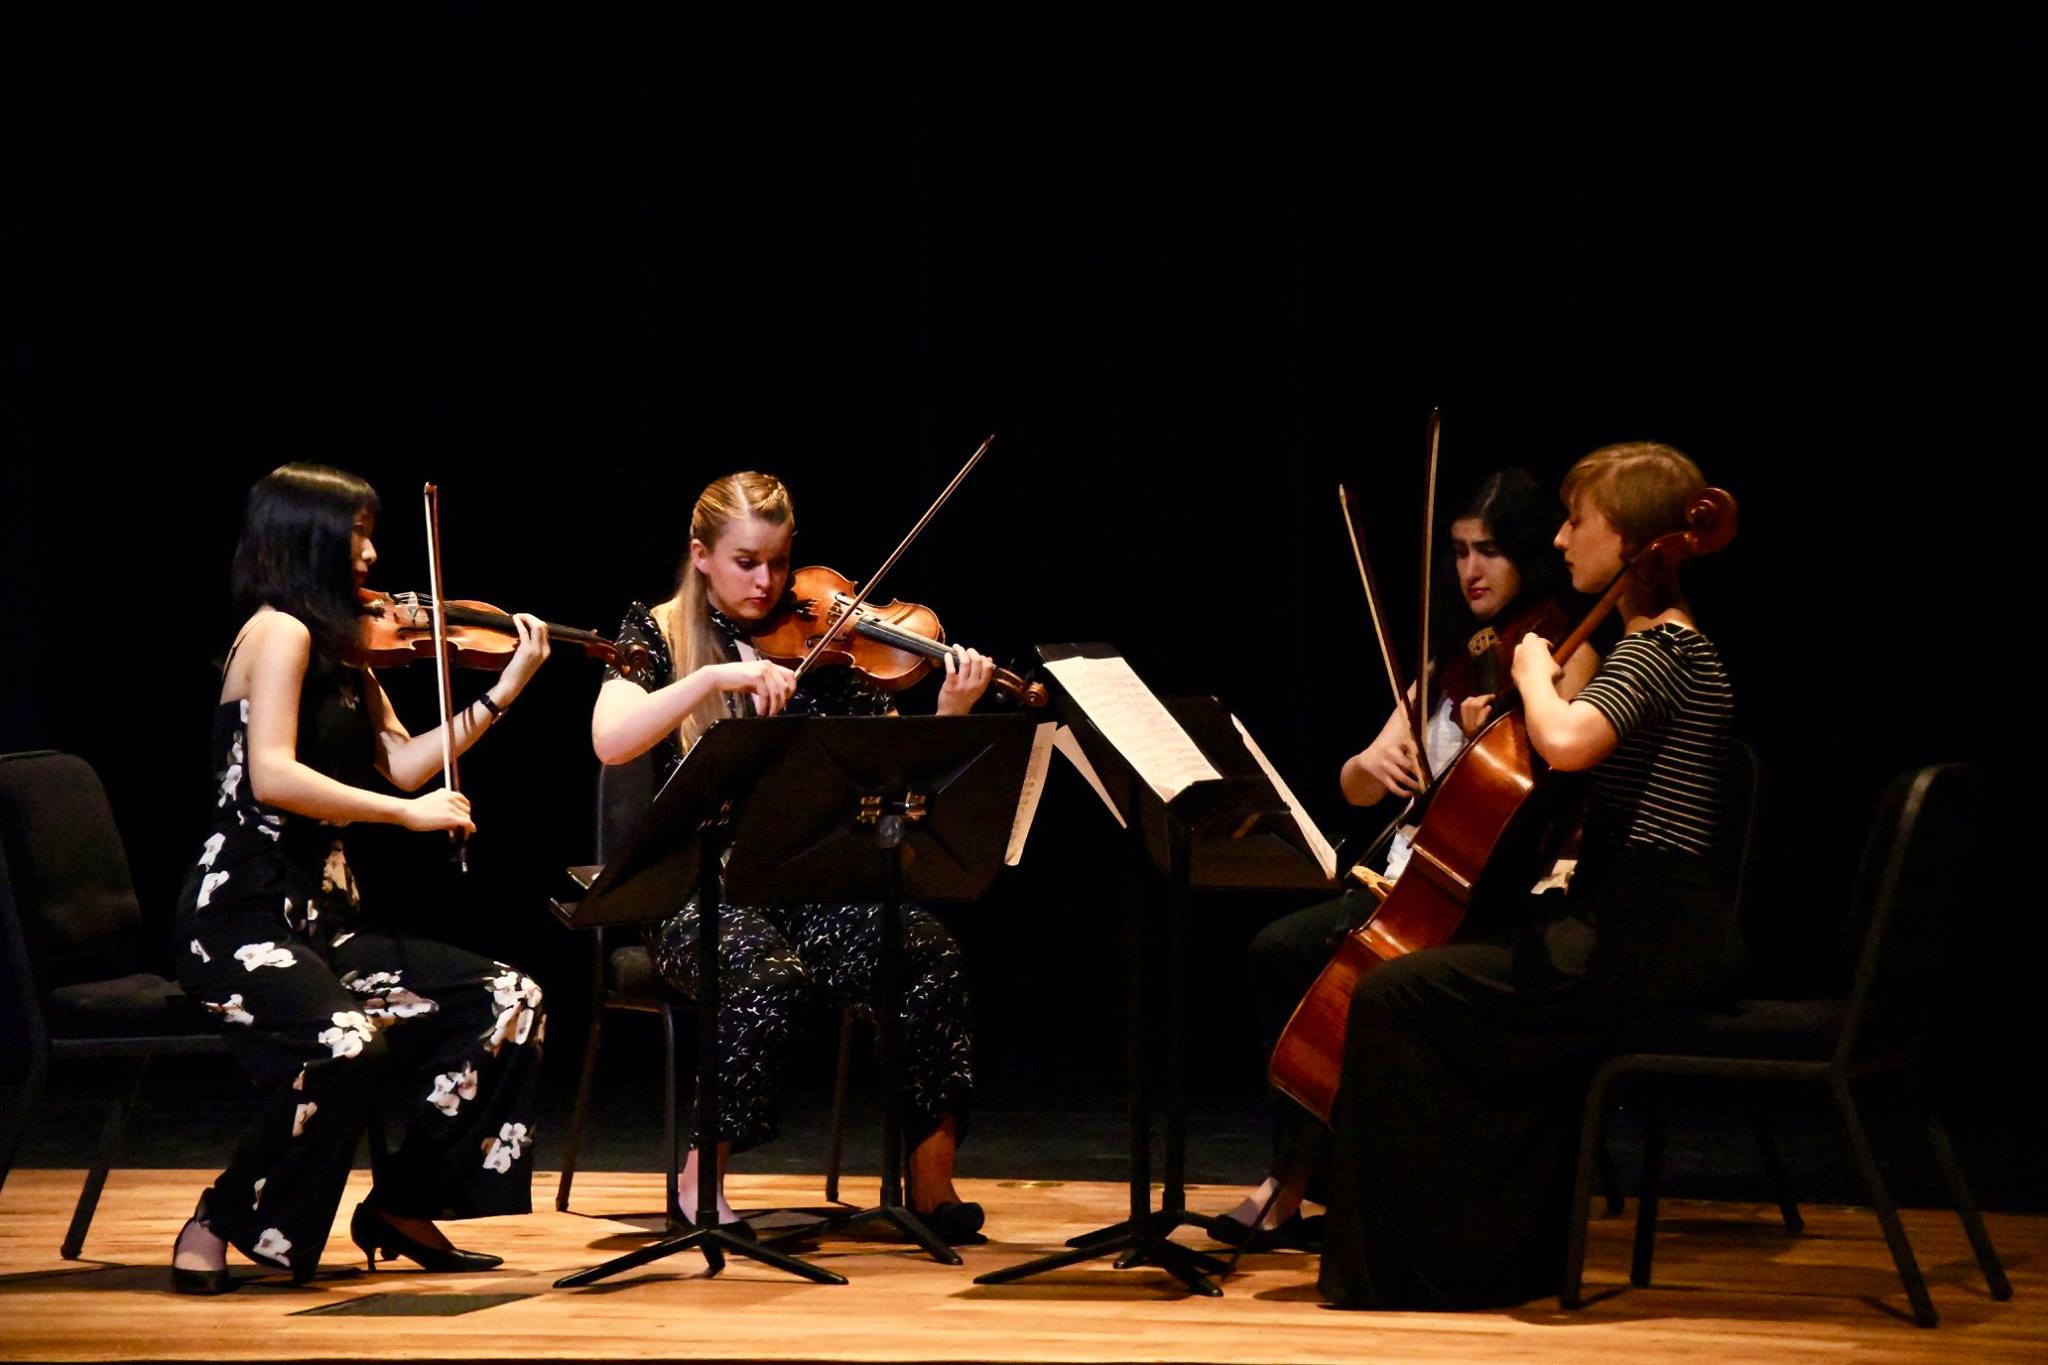 Music majors perform in a quartet at Lamont School of Music